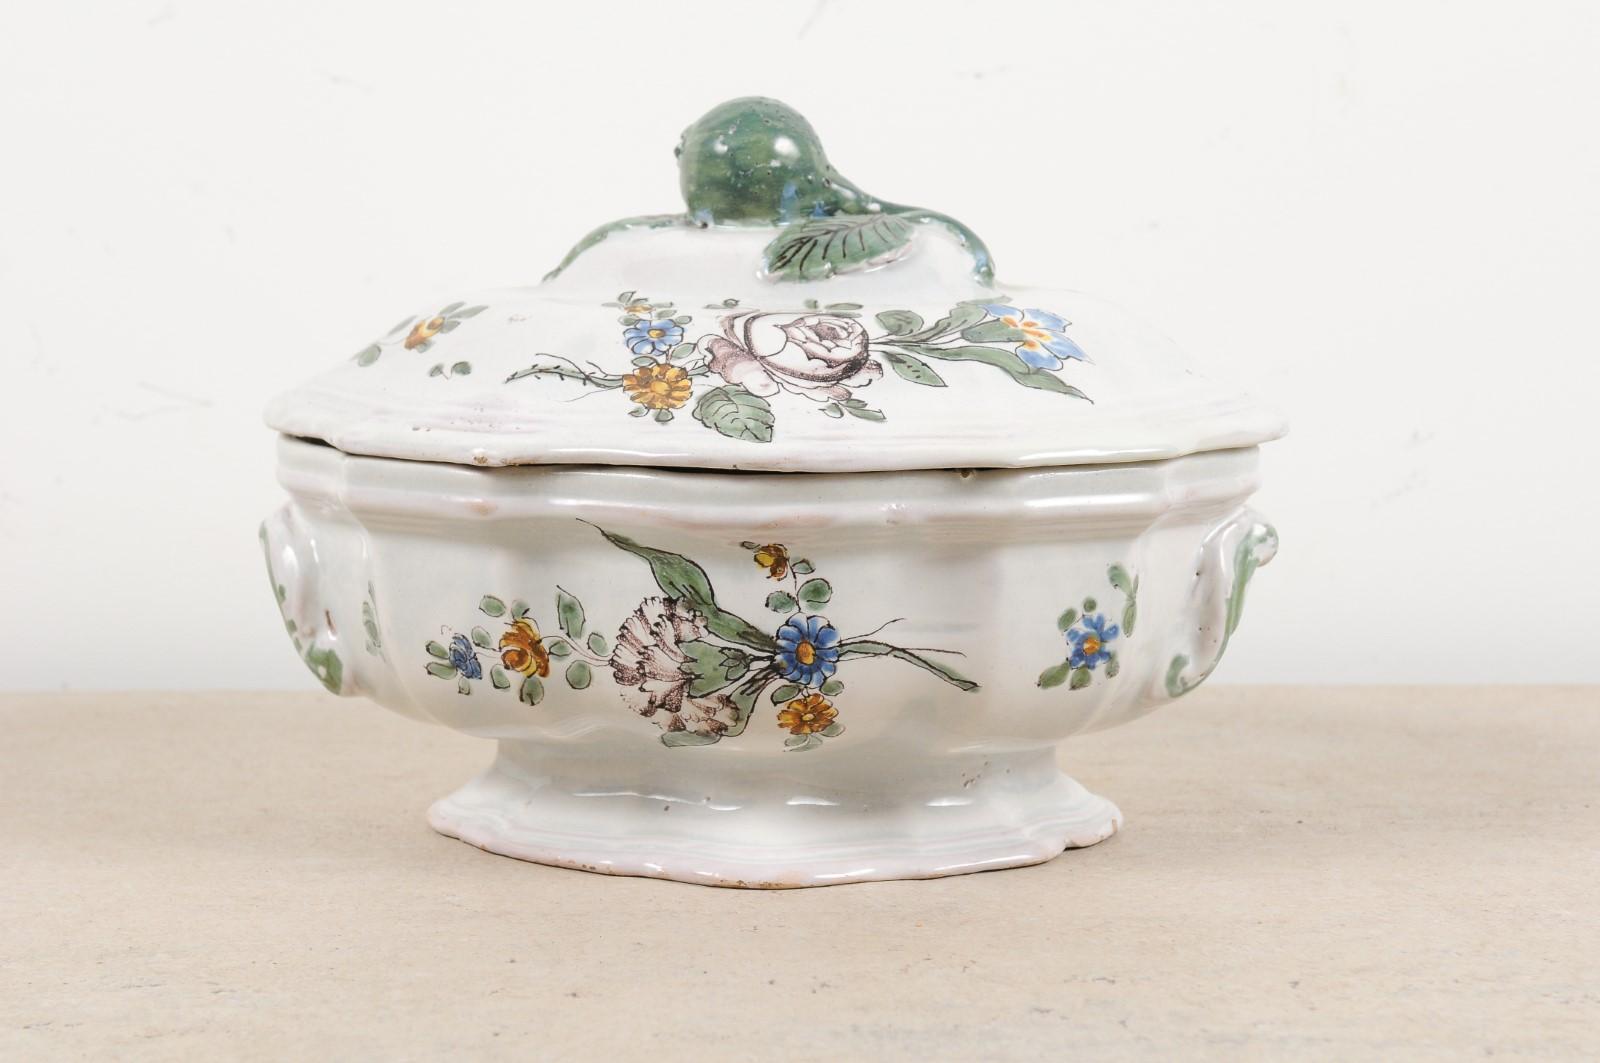 Hand-Painted French 1750s Faience Oval Shaped Soup Tureen from Bordeaux with Floral Decor